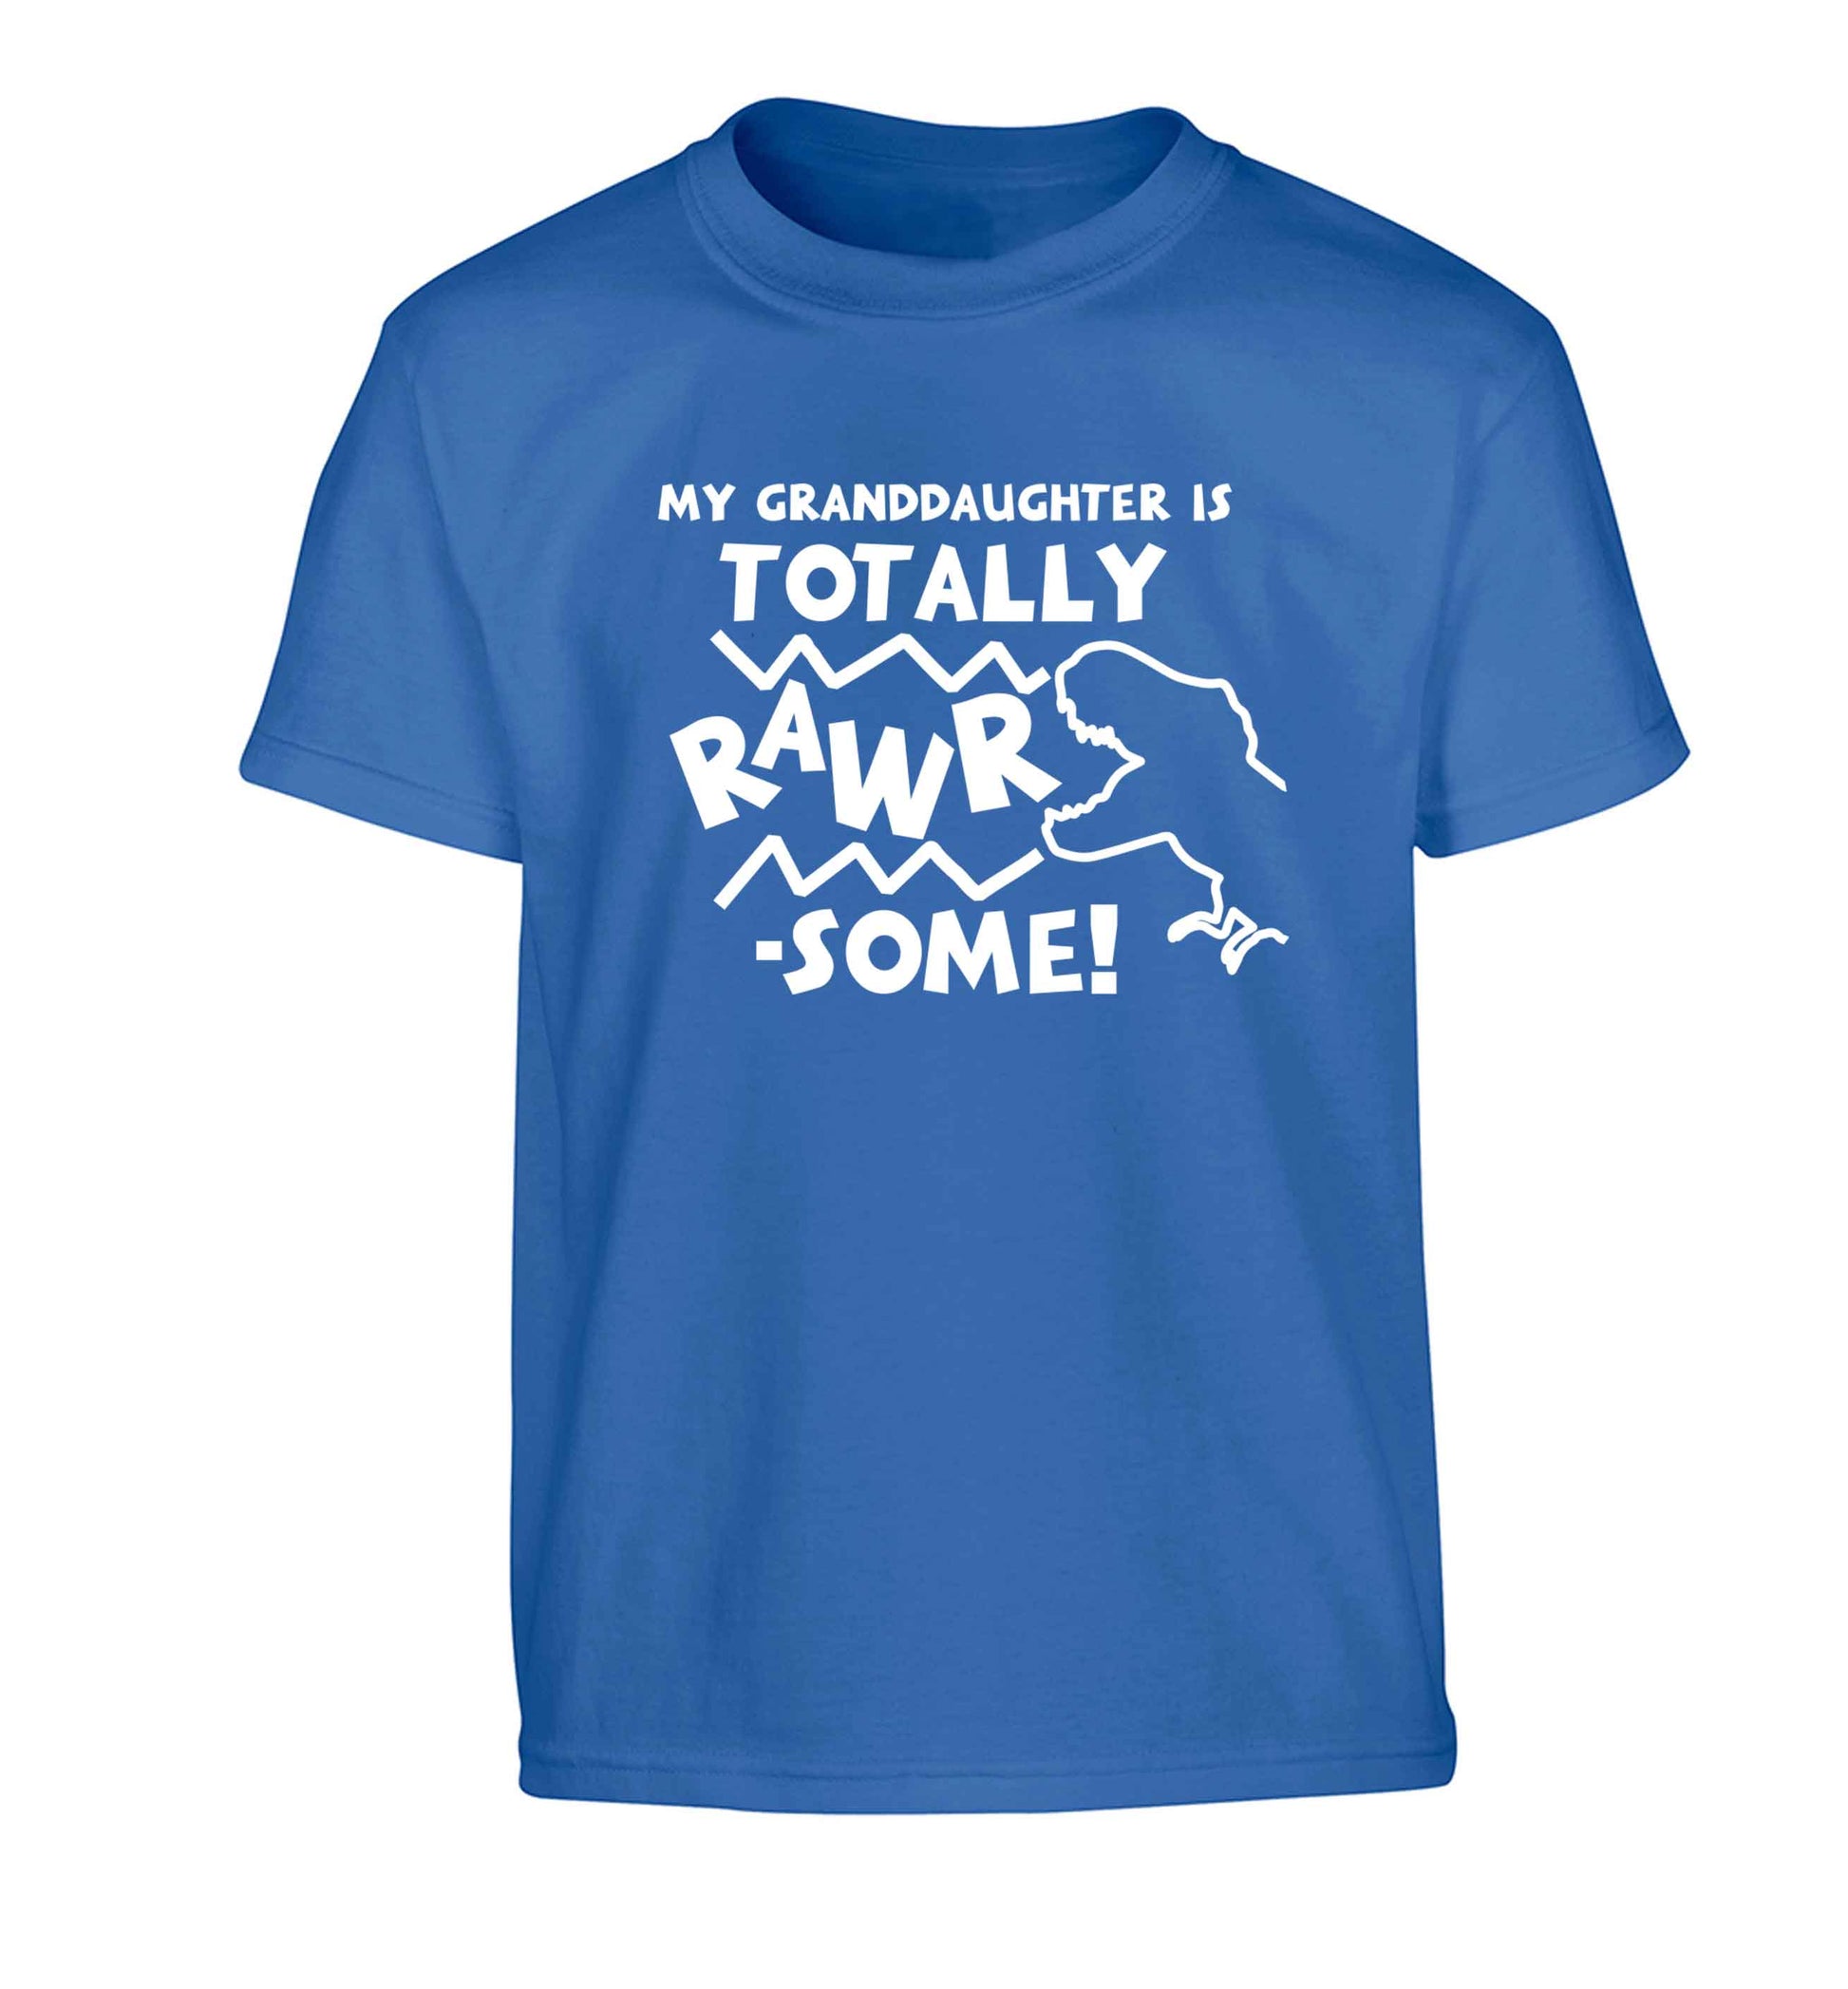 My granddaughter is totally rawrsome Children's blue Tshirt 12-13 Years